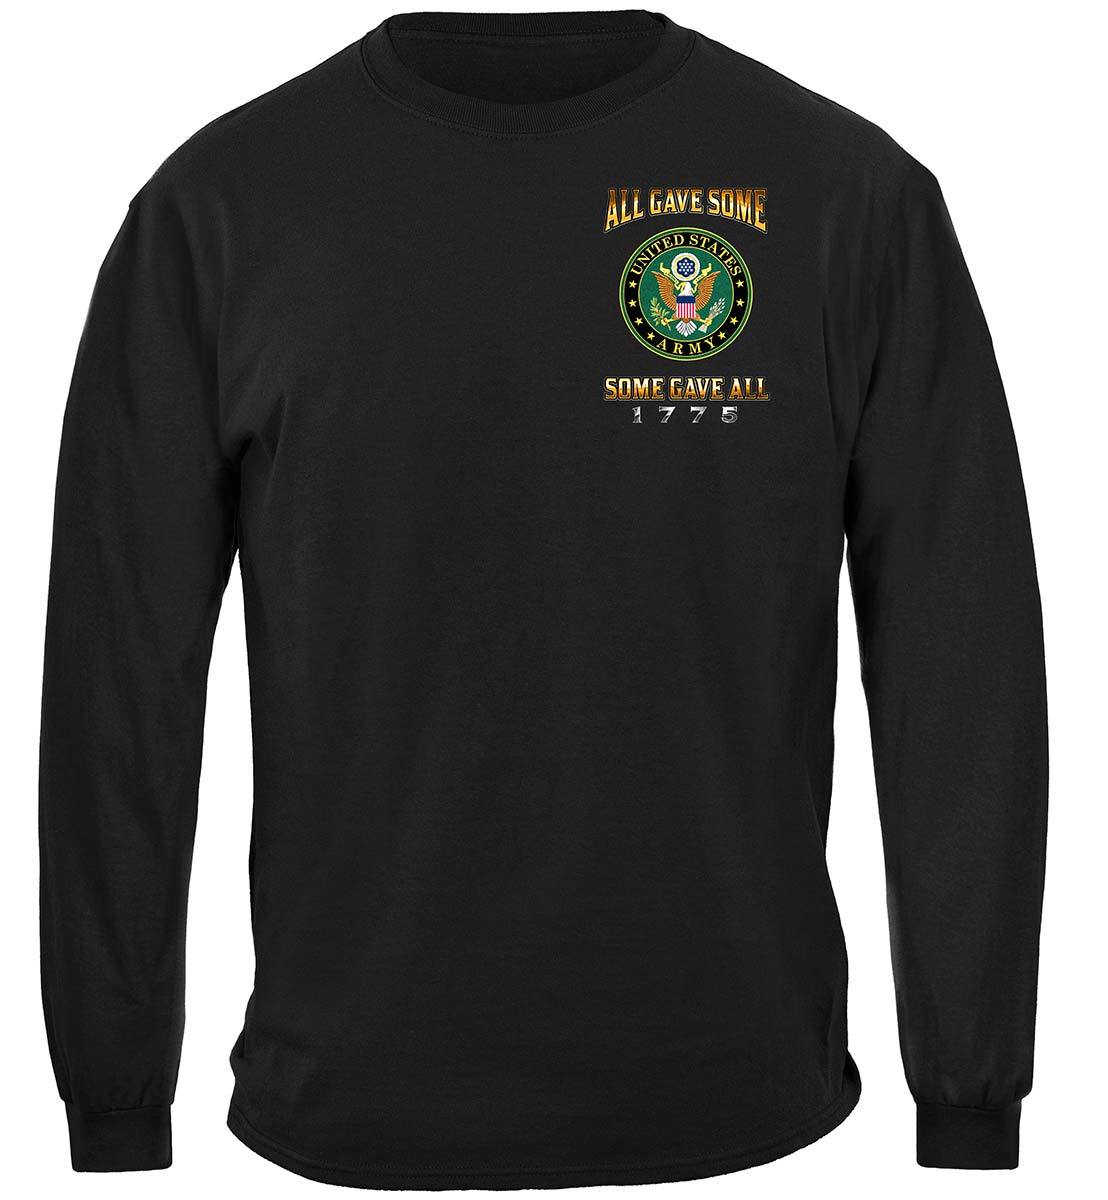 US Army All Gave Some Premium Long Sleeves